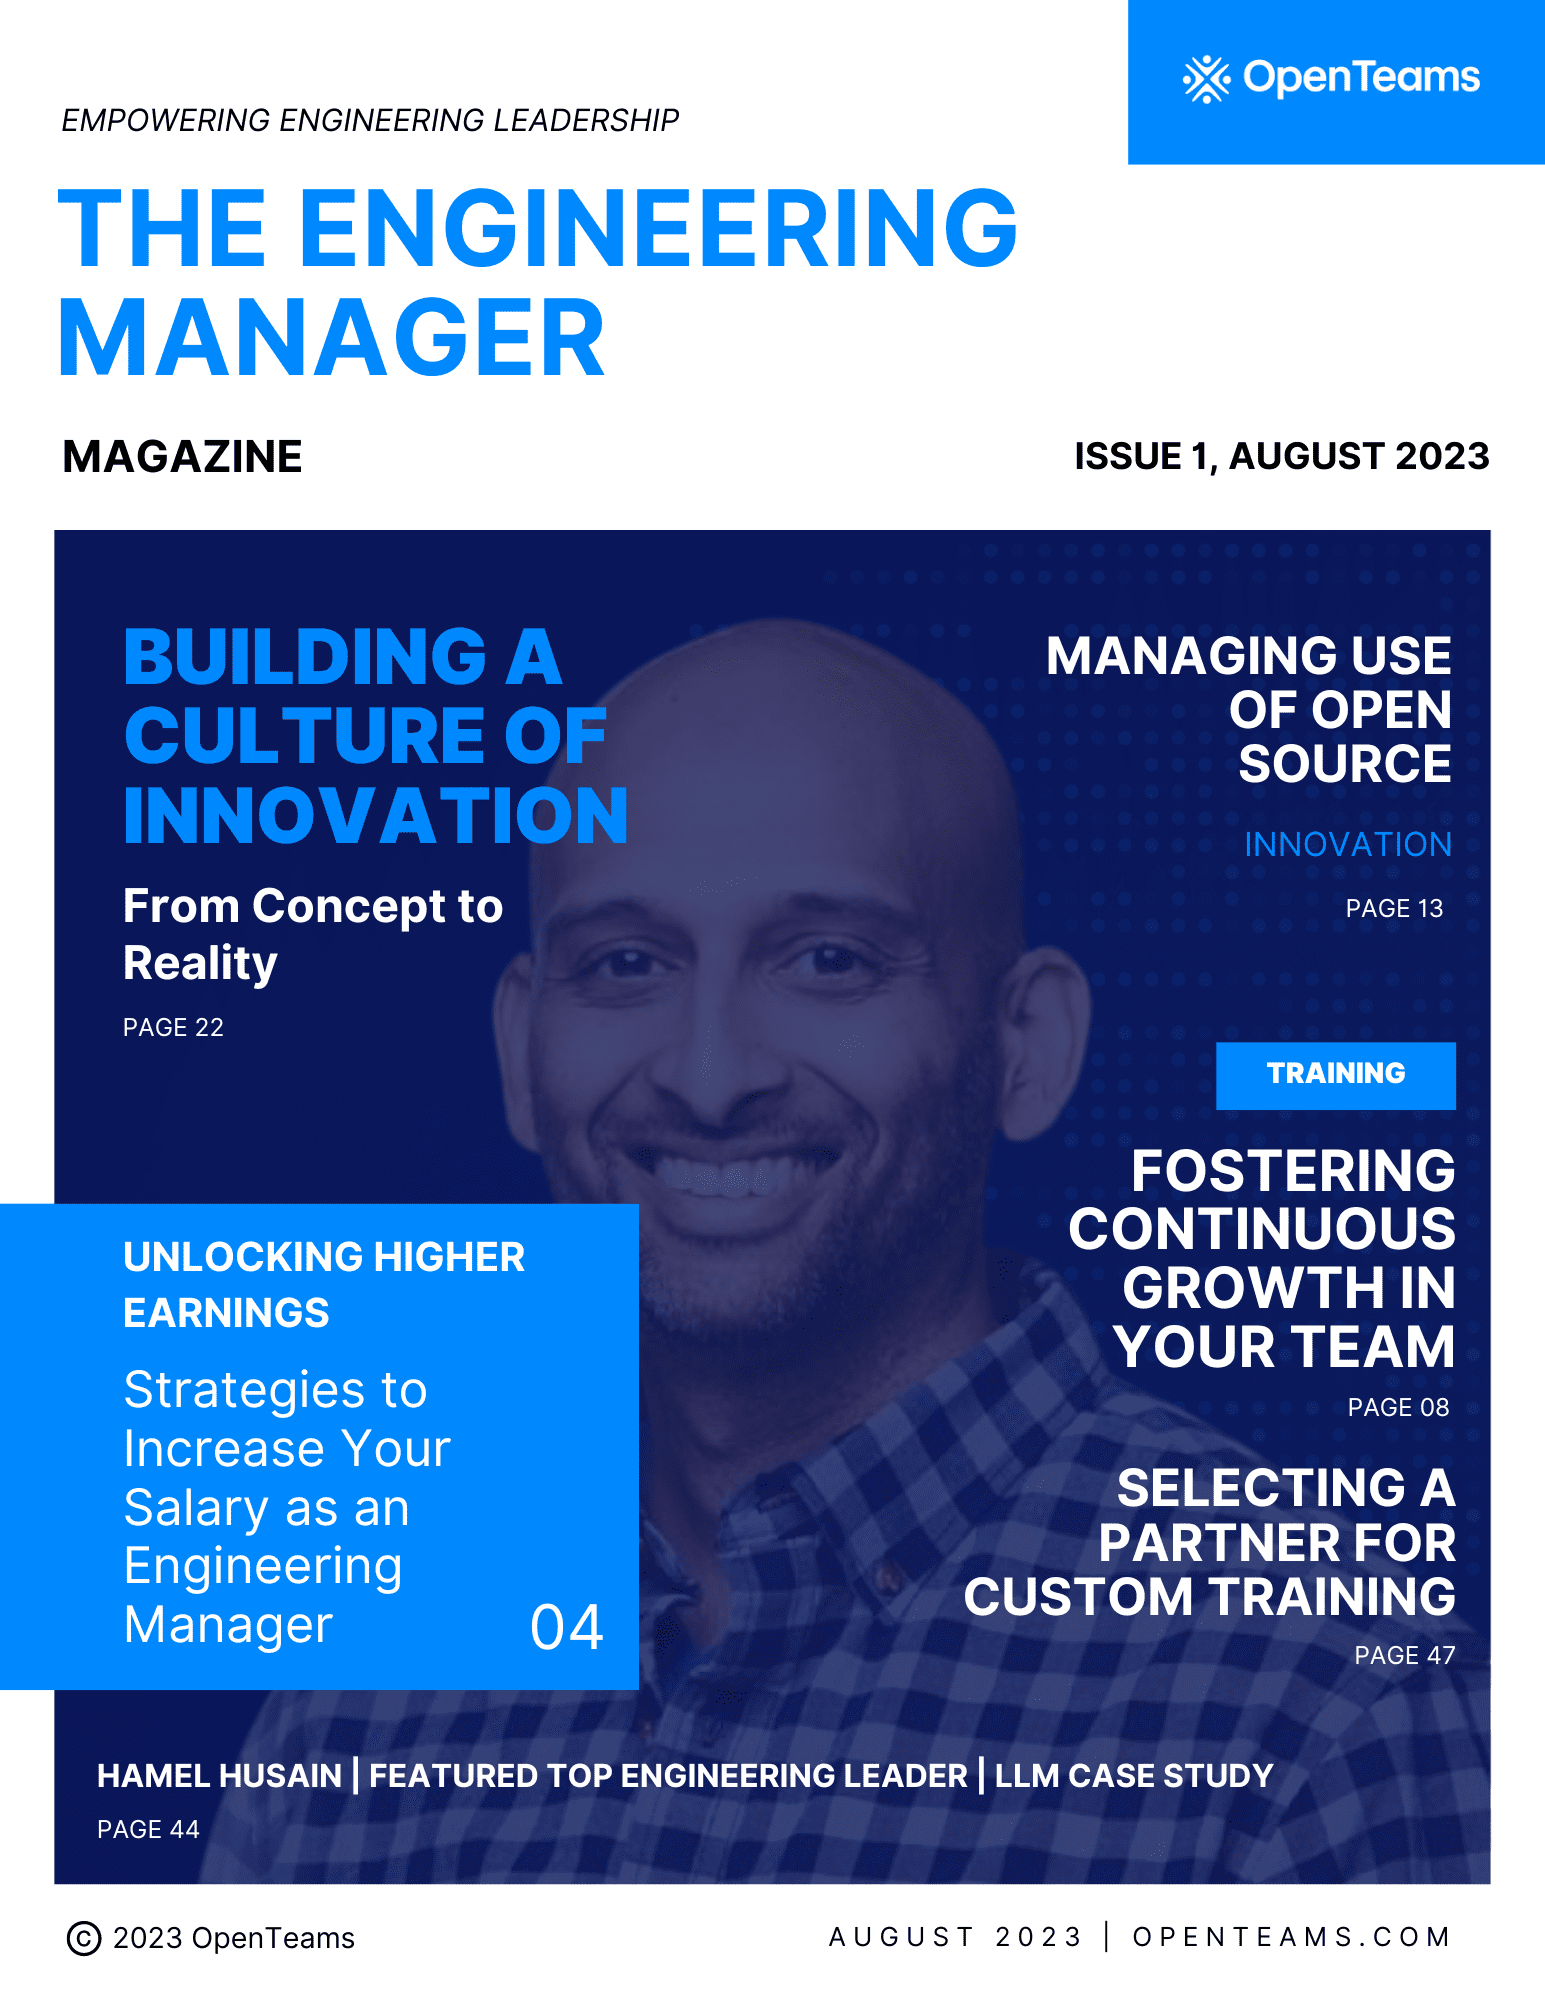 https://www.openteams.com/wp-content/uploads/2023/08/The-Engineering-Manager-Magazine-AUGUST-2023-1.png